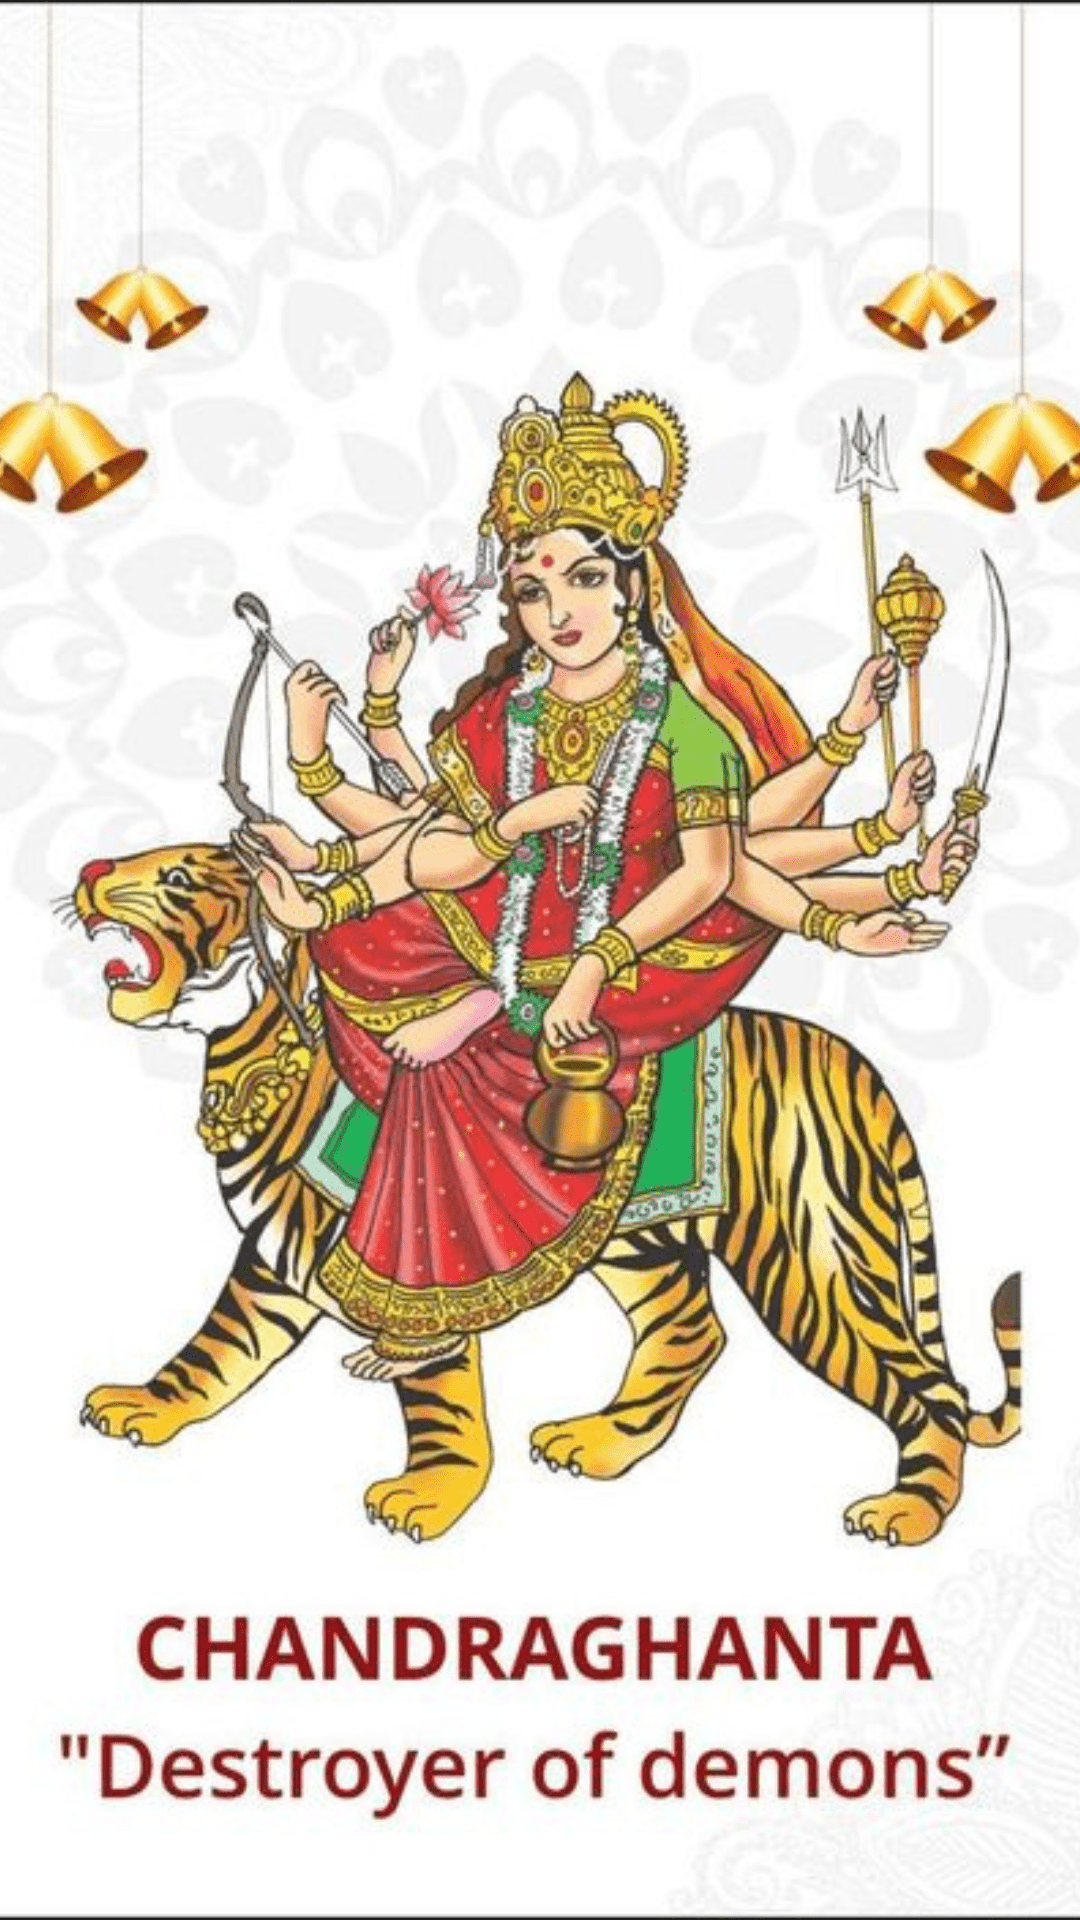 #{"id":2626,"_id":null,"name":"navratri-maa-chandraghanta-wishes","count":0,"data":null,"deleted_at":null,"created_at":"2023-09-30T10:41:37.000000Z","updated_at":"2023-09-30T10:41:37.000000Z","merge_with":null,"pivot":{"taggable_id":2470,"tag_id":2626,"taggable_type":"App\\Models\\Status"}}, #{"id":2627,"_id":null,"name":"navratri-maa-chandraghanta-quotes--2023","count":0,"data":null,"deleted_at":null,"created_at":"2023-09-30T10:41:37.000000Z","updated_at":"2023-09-30T10:41:37.000000Z","merge_with":null,"pivot":{"taggable_id":2470,"tag_id":2627,"taggable_type":"App\\Models\\Status"}}, #{"id":2628,"_id":null,"name":"maa-chandraghanta-puja-status","count":0,"data":null,"deleted_at":null,"created_at":"2023-09-30T10:41:37.000000Z","updated_at":"2023-09-30T10:41:37.000000Z","merge_with":null,"pivot":{"taggable_id":2470,"tag_id":2628,"taggable_type":"App\\Models\\Status"}}, #{"id":72,"_id":"61f3f785e0f744570541c077","name":"navratri-wishes","count":42,"data":"{\"_id\":{\"$oid\":\"61f3f785e0f744570541c077\"},\"id\":\"46\",\"name\":\"navratri-wishes\",\"created_at\":\"2020-10-15-18:56:19\",\"updated_at\":\"2020-10-15-18:56:19\",\"updatedAt\":{\"$date\":\"2022-01-28T14:33:44.922Z\"},\"count\":42}","deleted_at":null,"created_at":"2020-10-15T06:56:19.000000Z","updated_at":"2020-10-15T06:56:19.000000Z","merge_with":null,"pivot":{"taggable_id":2470,"tag_id":72,"taggable_type":"App\\Models\\Status"}}, #{"id":1741,"_id":"624b035e3e6d397ee345976a","name":"happy-navratri","count":15,"data":"{\"_id\":{\"$oid\":\"624b035e3e6d397ee345976a\"},\"name\":\"happy-navratri\",\"count\":15,\"updatedAt\":{\"$date\":\"2022-04-04T15:00:12.807Z\"}}","deleted_at":null,"created_at":"2022-08-12T09:03:30.000000Z","updated_at":"2022-08-12T09:03:30.000000Z","merge_with":null,"pivot":{"taggable_id":2470,"tag_id":1741,"taggable_type":"App\\Models\\Status"}}